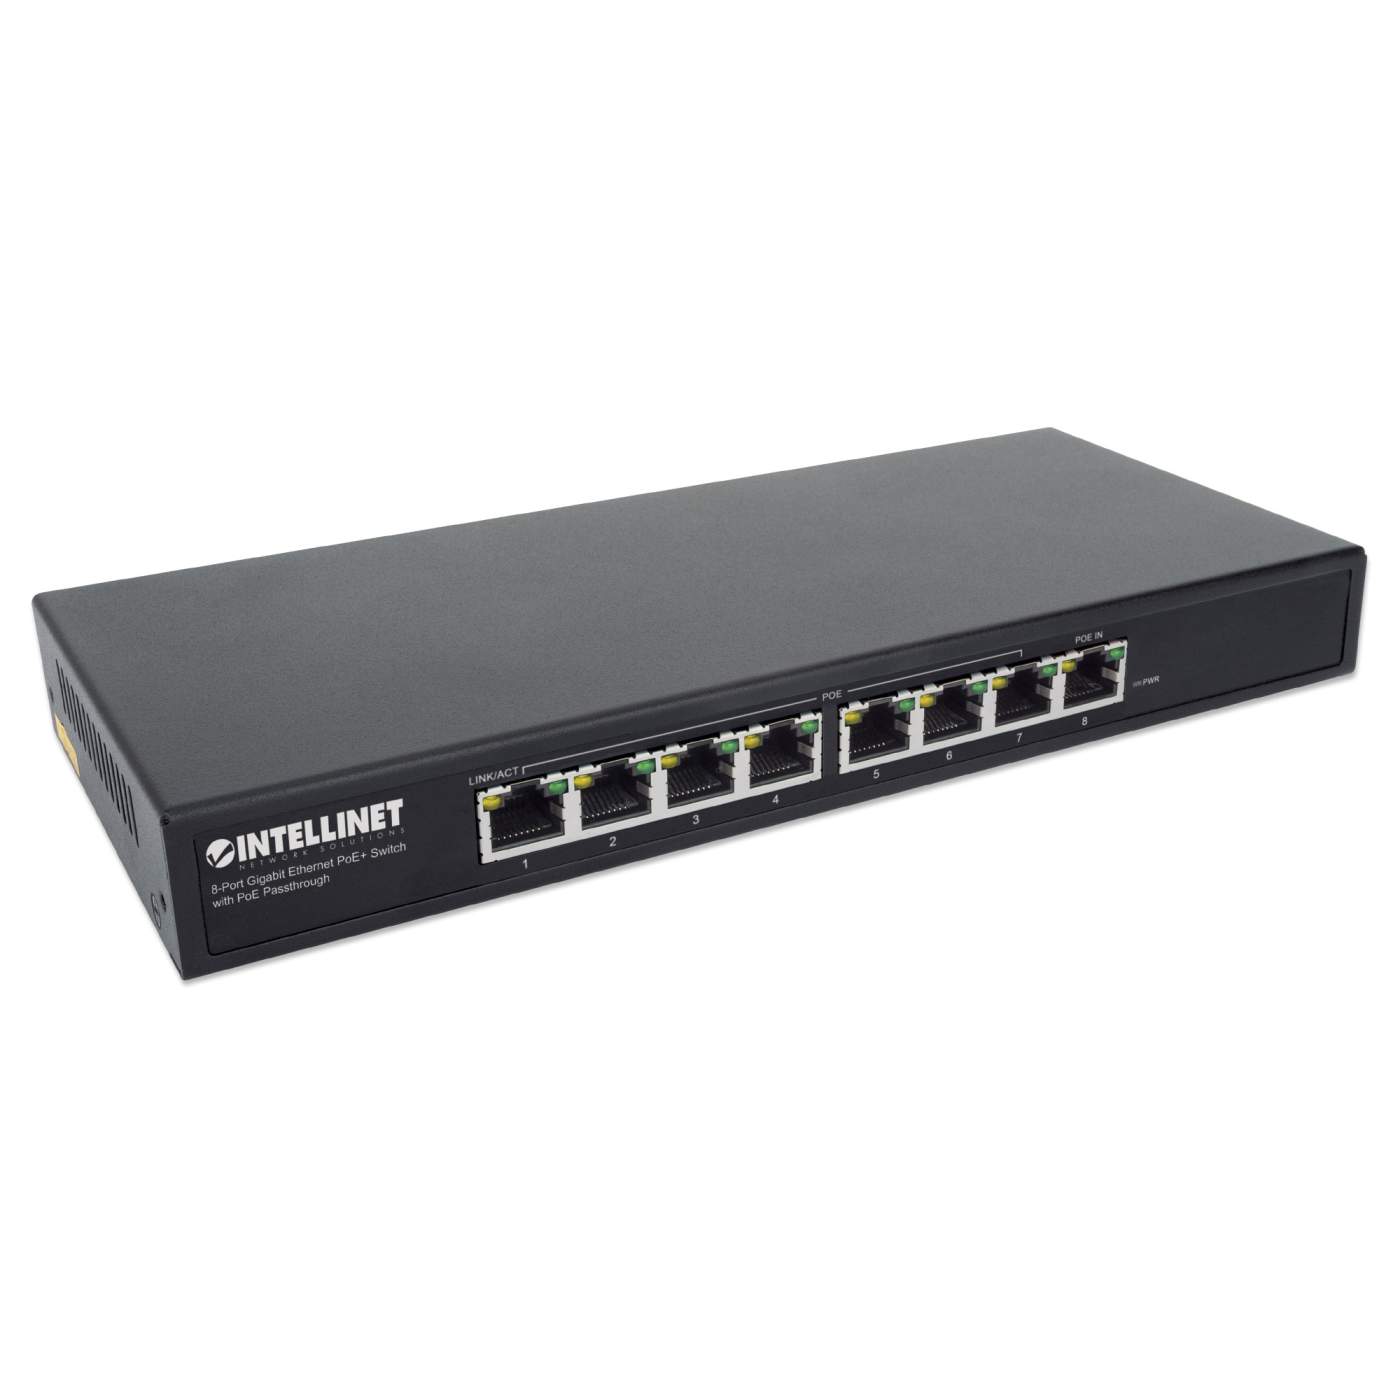 PoE-Powered 8-Port Gigabit Ethernet PoE+ Switch with PoE Passthrough